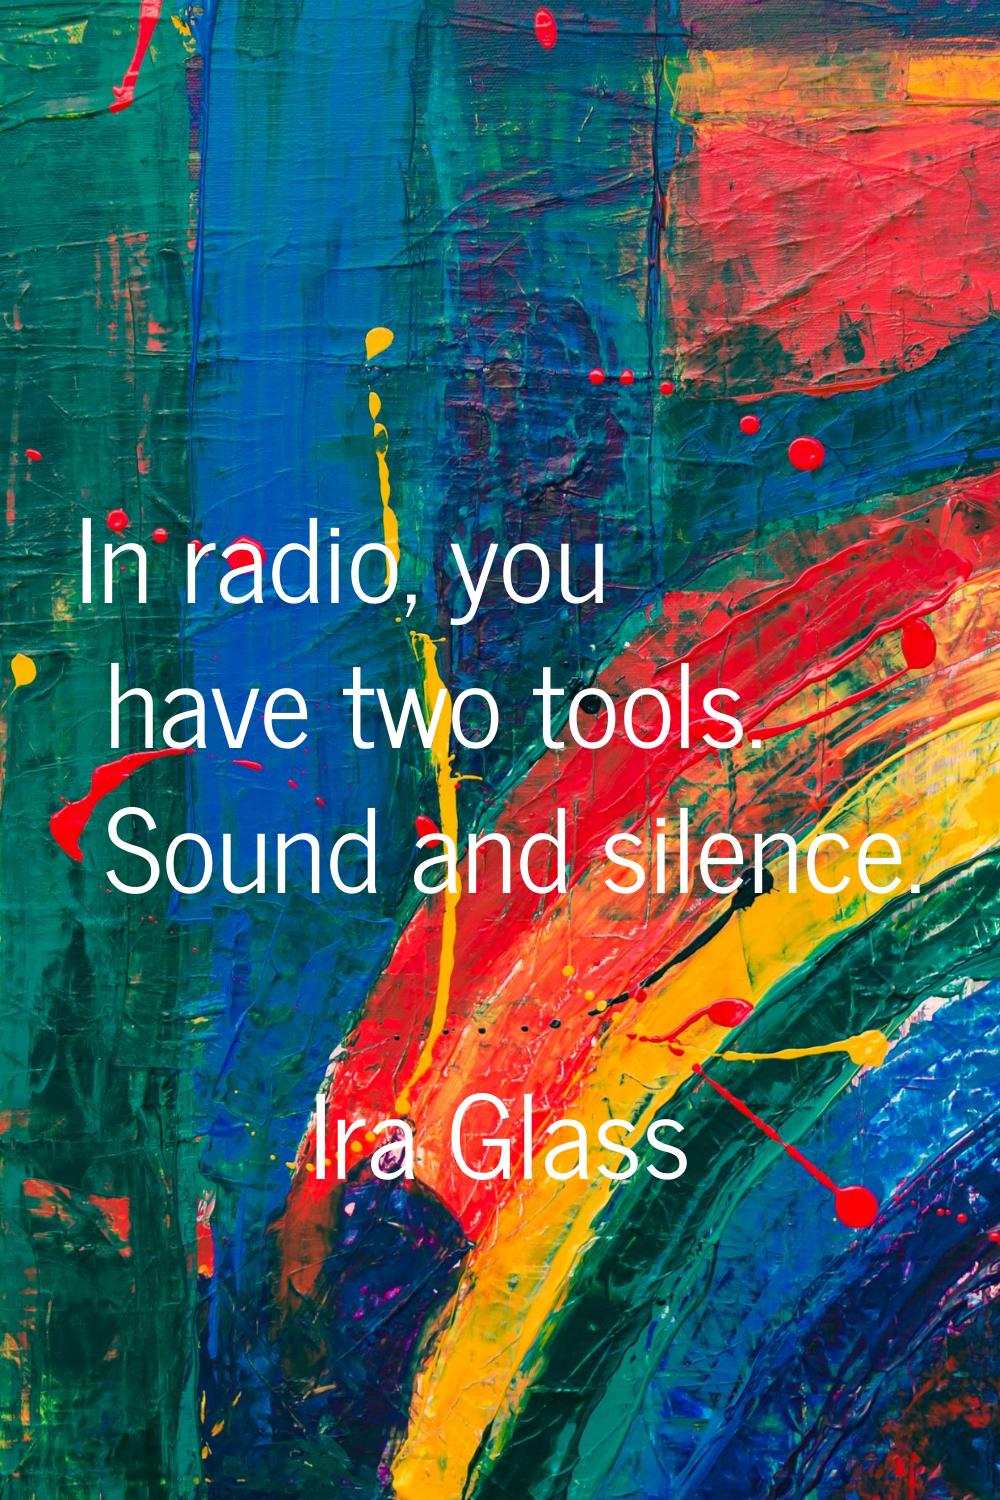 In radio, you have two tools. Sound and silence.